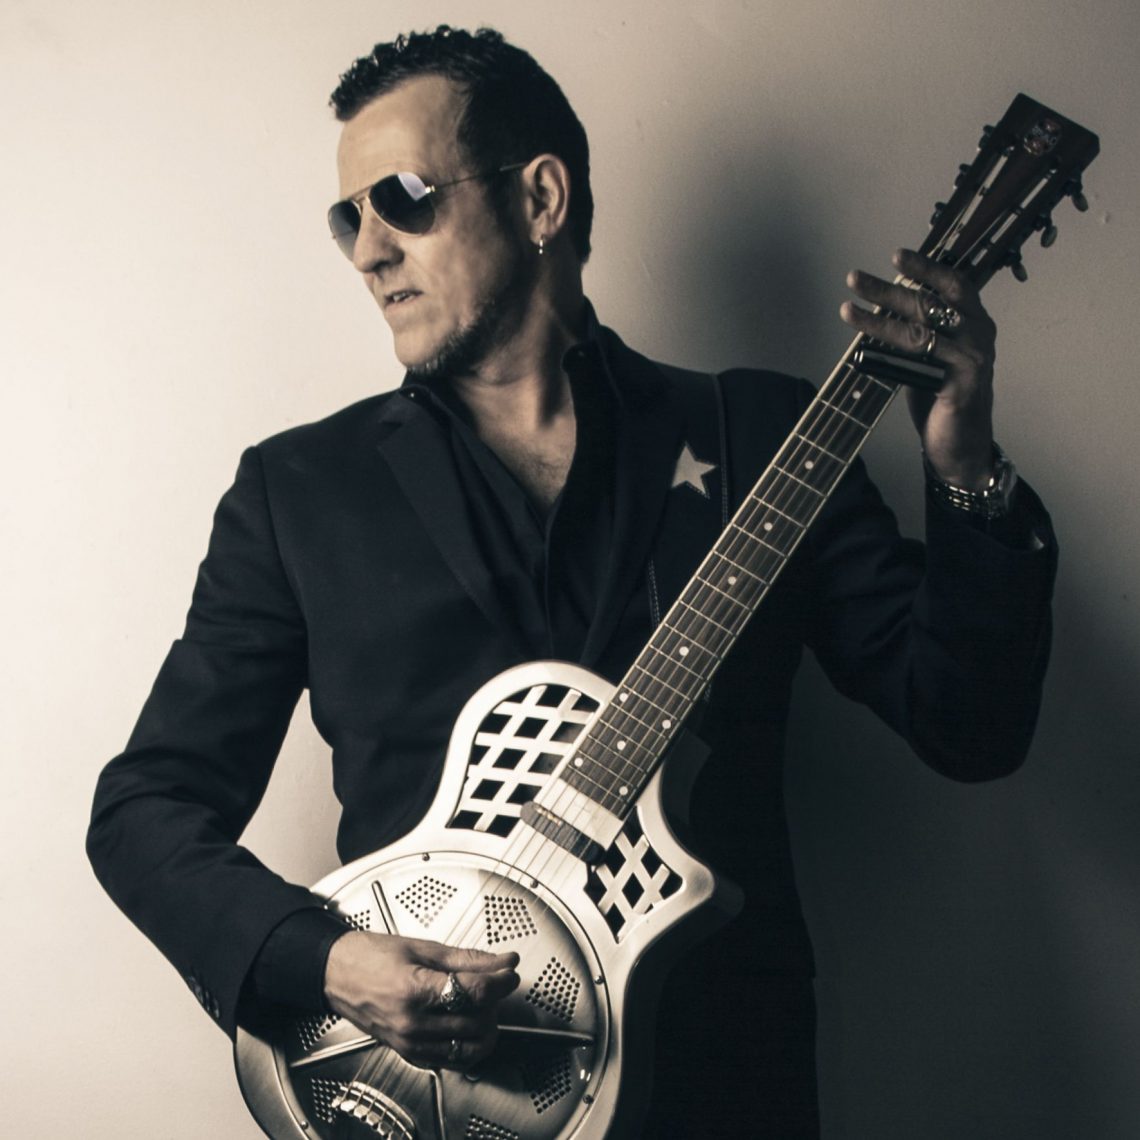 Gary Hoey Collaborates With His Son On New Song “Don’t Come Crying”